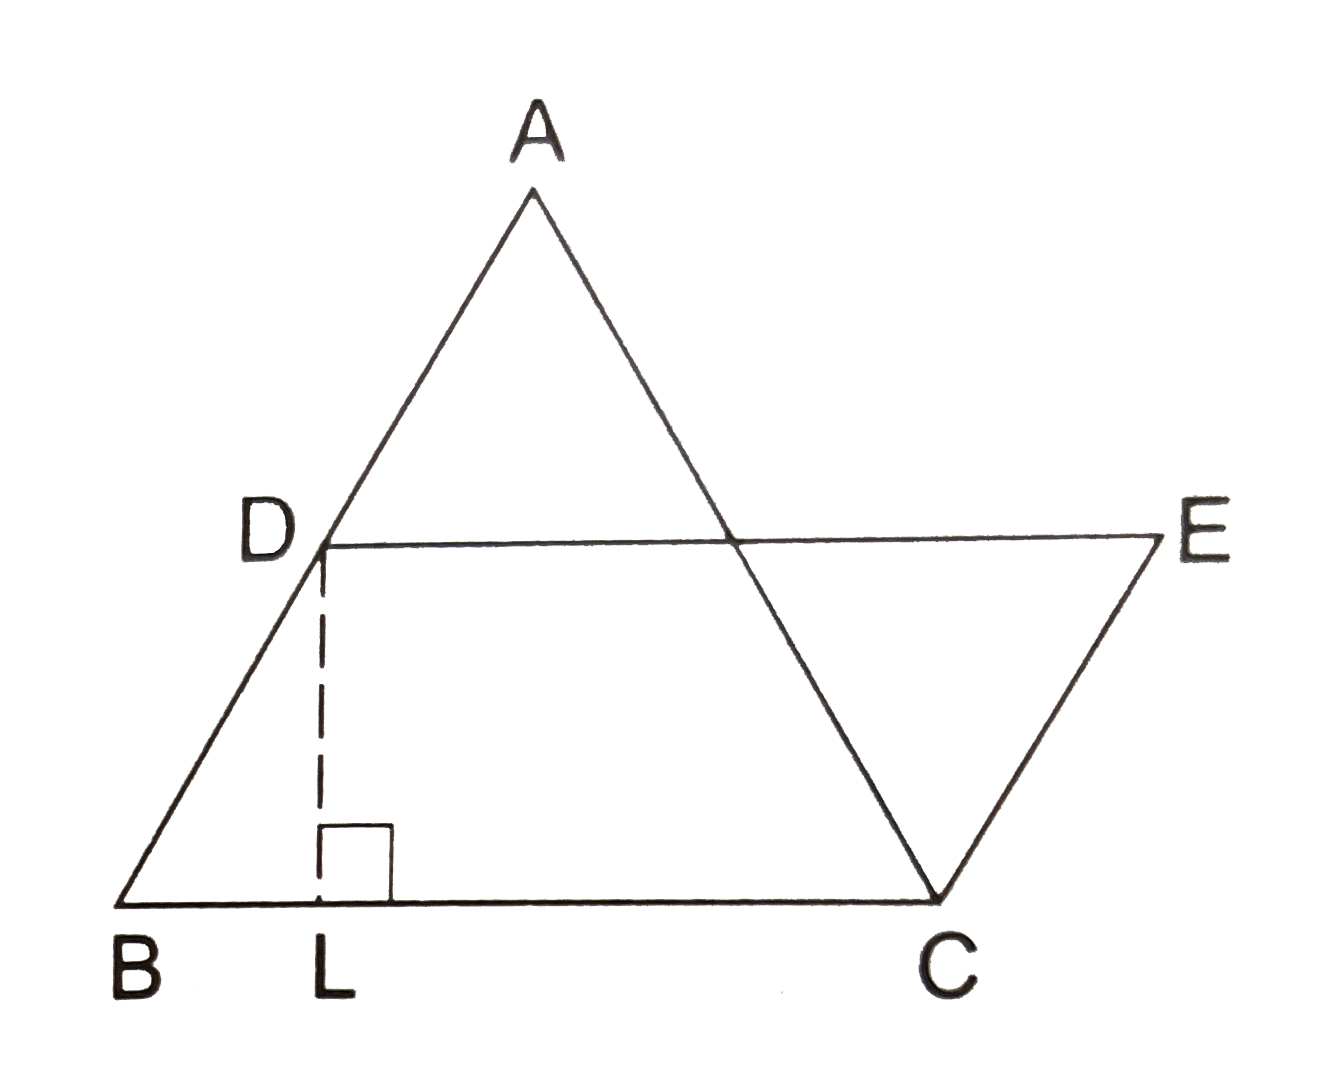 In the given figure, a Delta ABC has been given in which AB = 7.5 cm, AC = 6.5 cm and BC = 7 cm. On base BC, a parallelogram DBCE of the same area as that of Delta ABC is constructed. Find the height DL of the parallelogram.